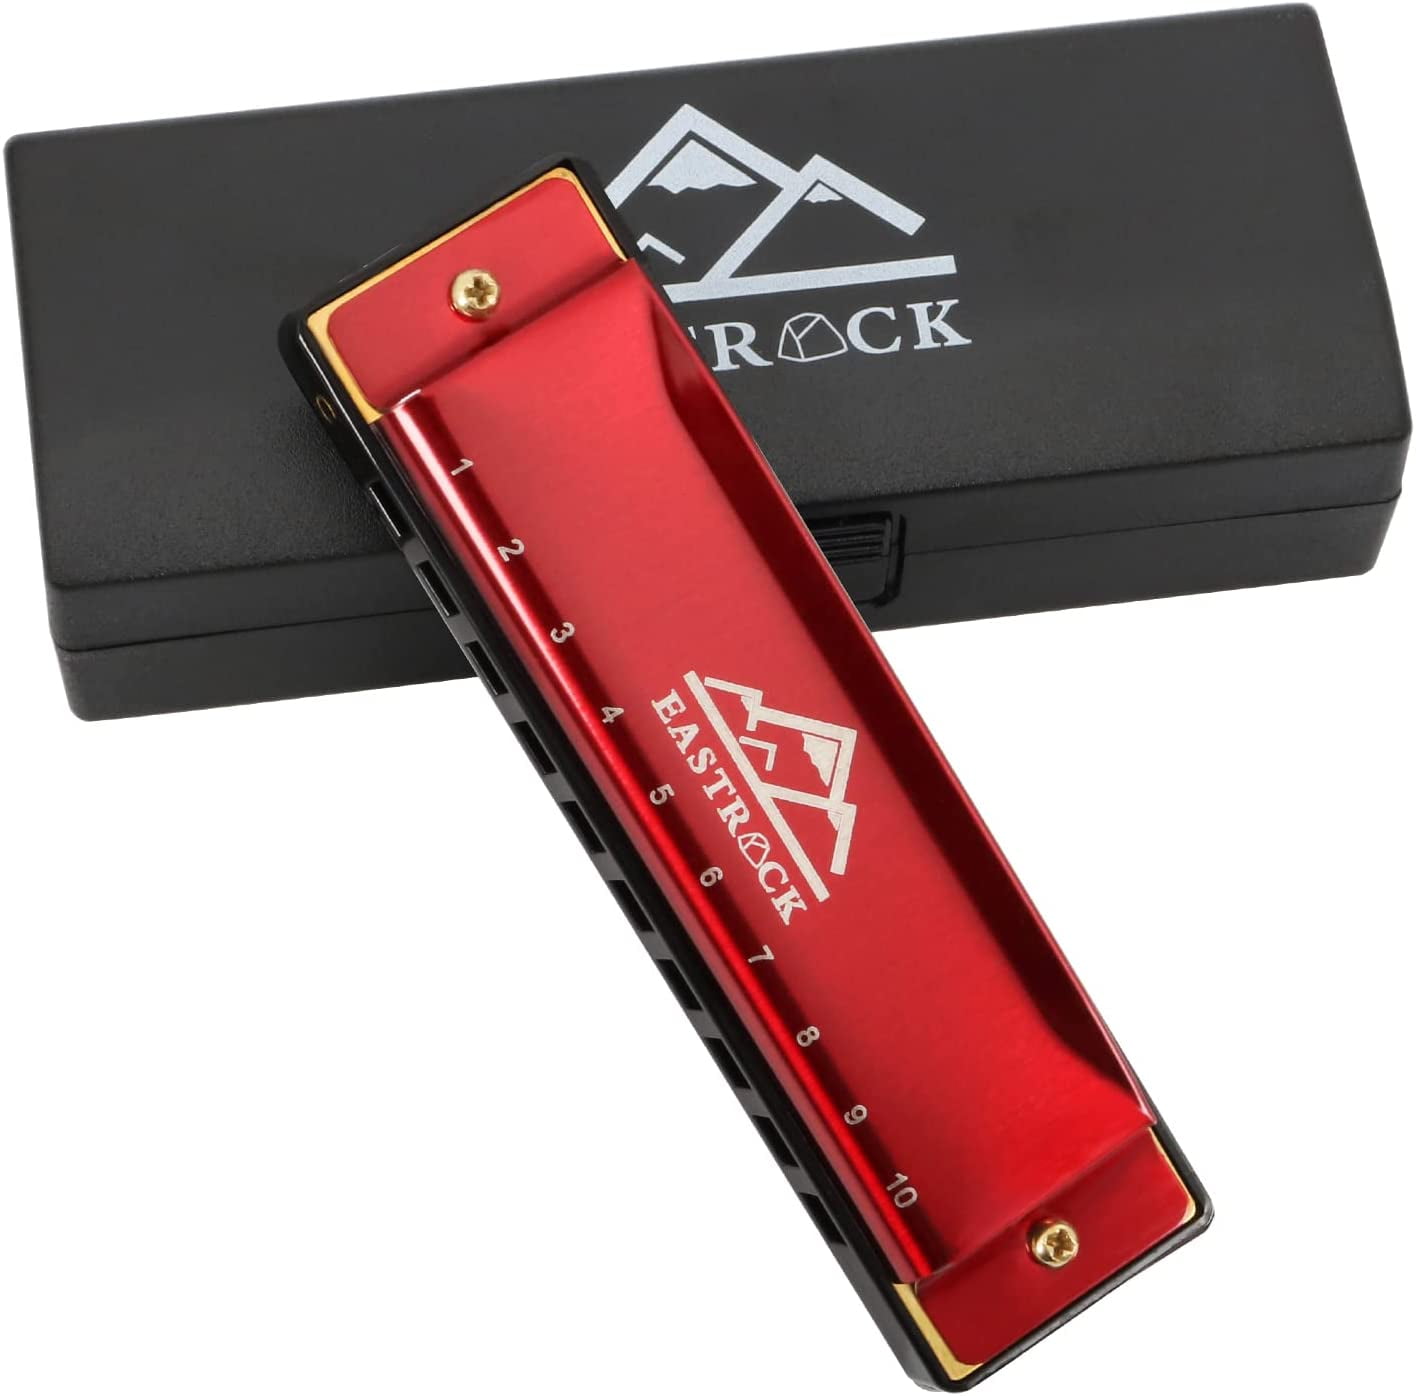 EastRock Blues Harmonica 10 Hole C Key with Case, Mouth Organ Harp,  Diatonic Harmonica for Beginner, Adult, Kids, Professional, Students,  Friends